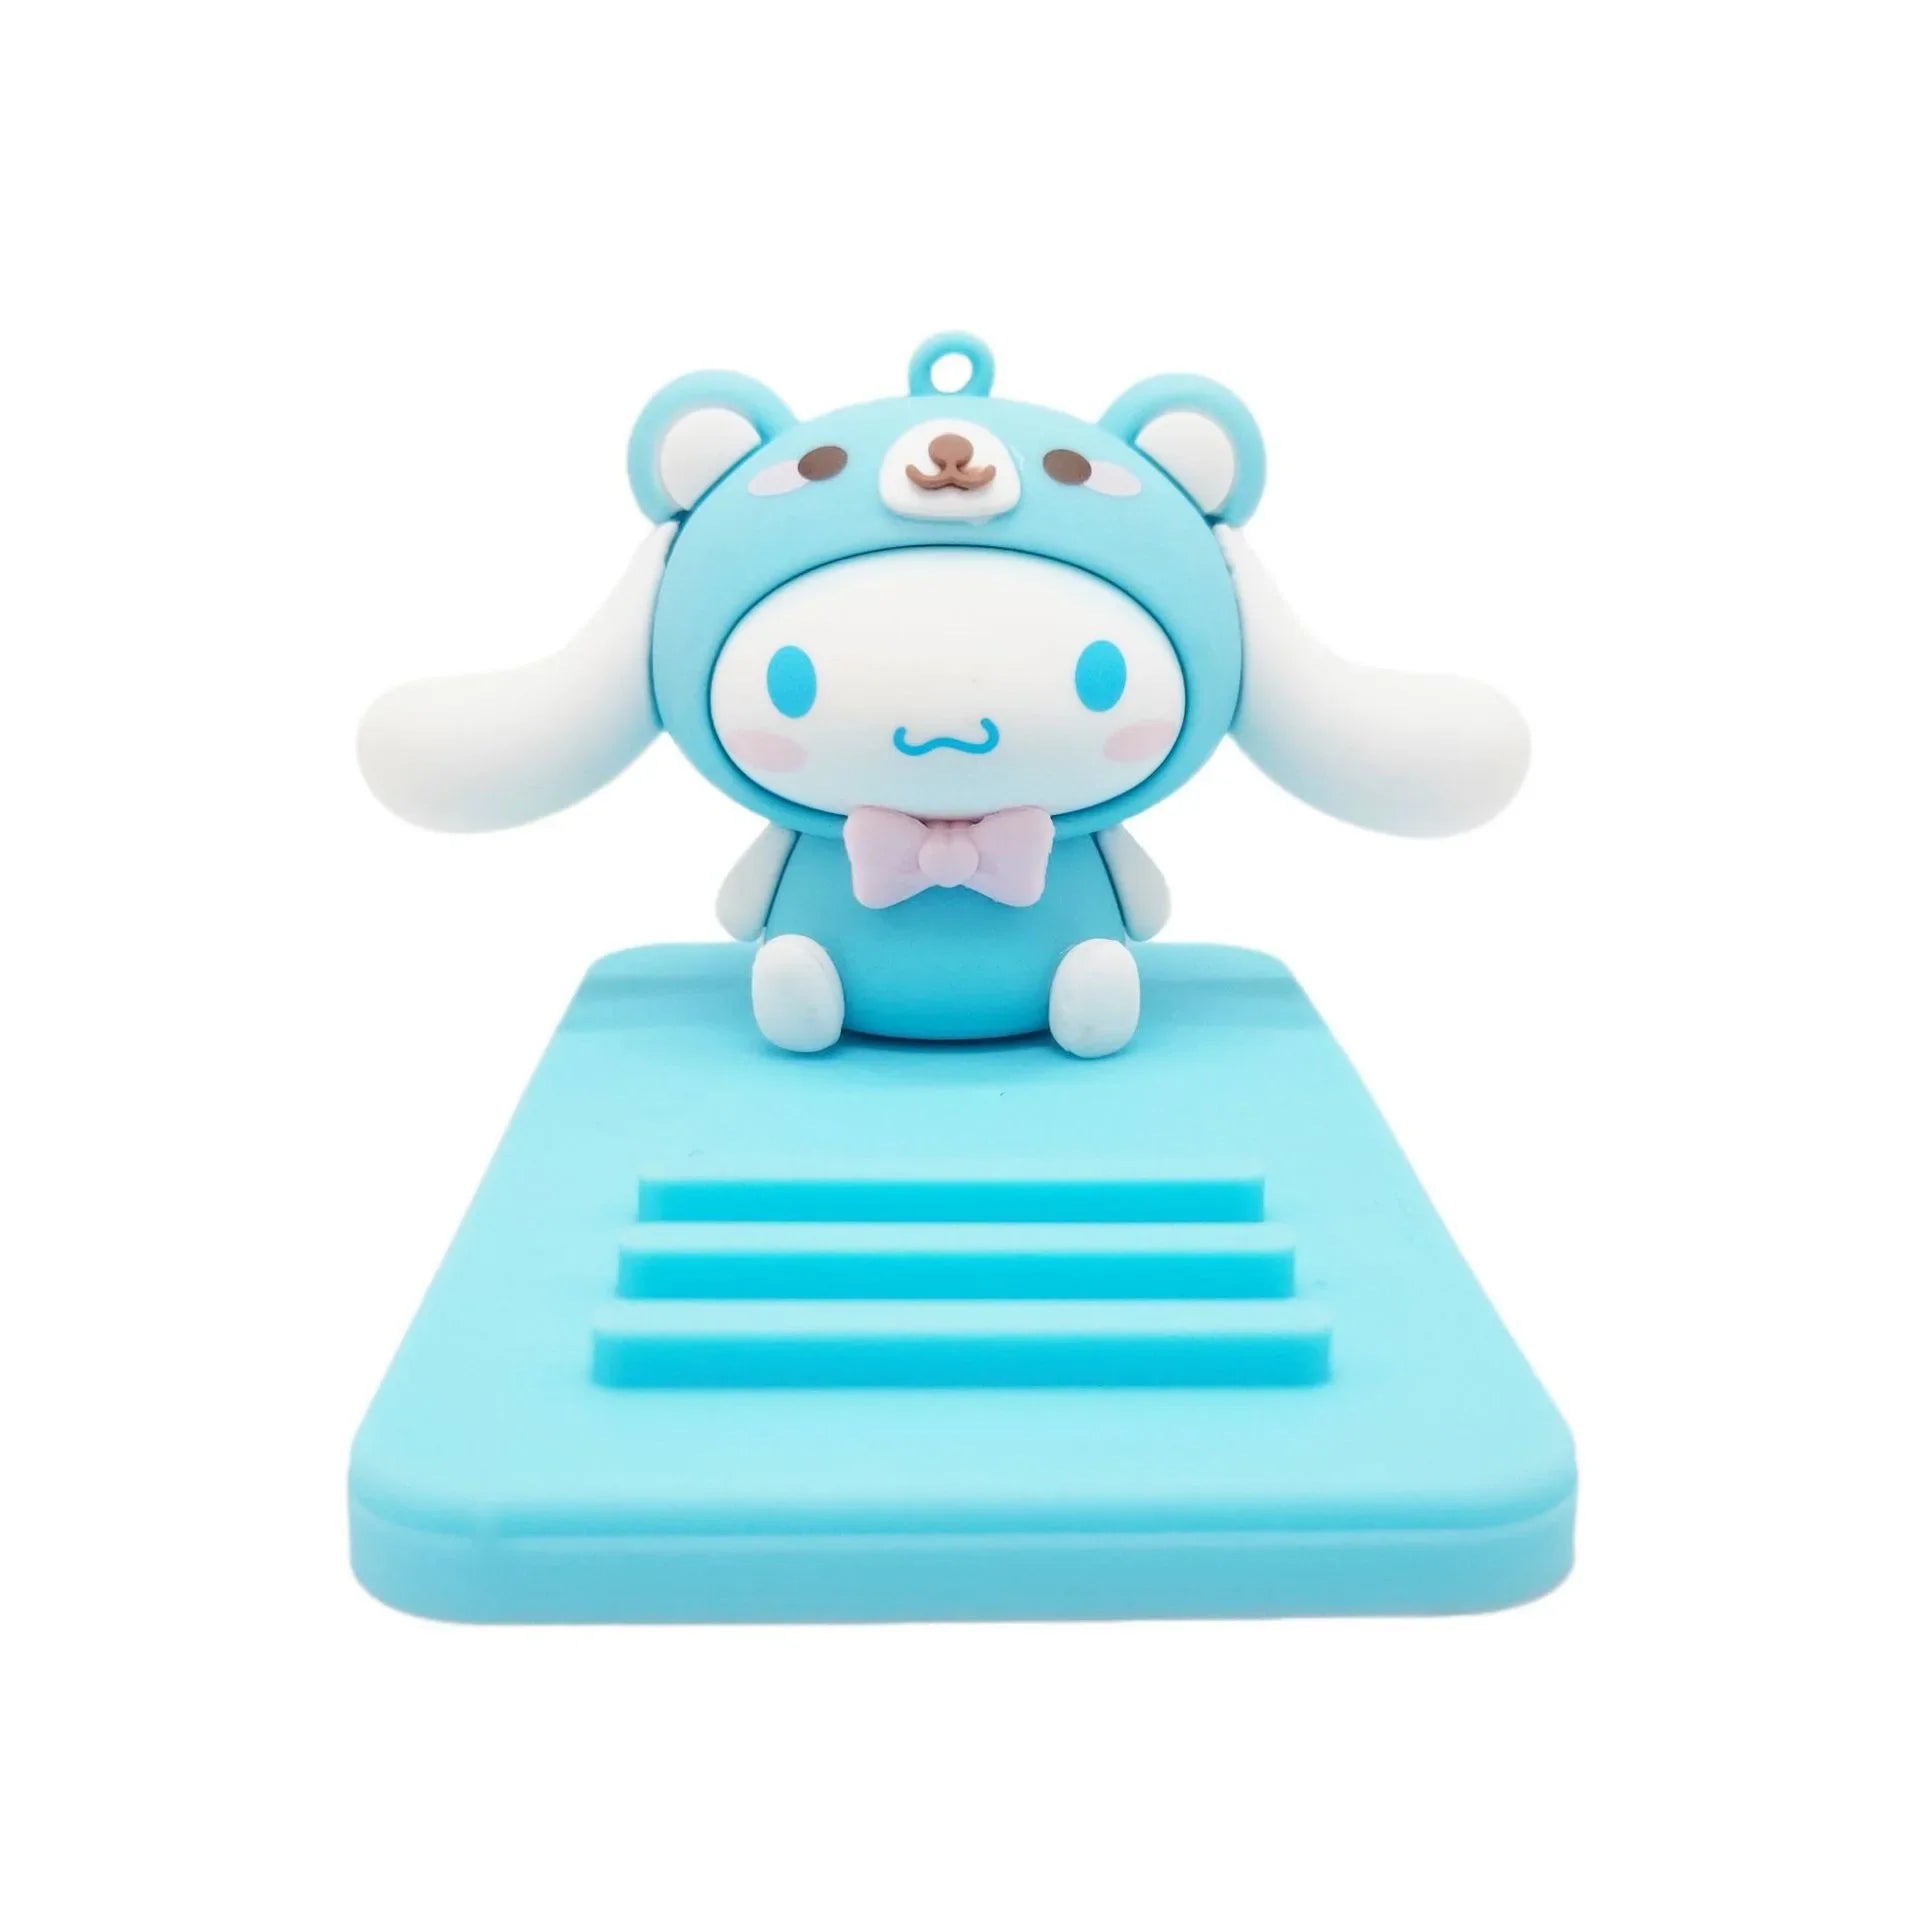 Sanrio Mobile Phone & Tablet Stand - Hello Kitty & Friends Desk Accessories - Cinnamoroll-2 - All Products - Apparel &